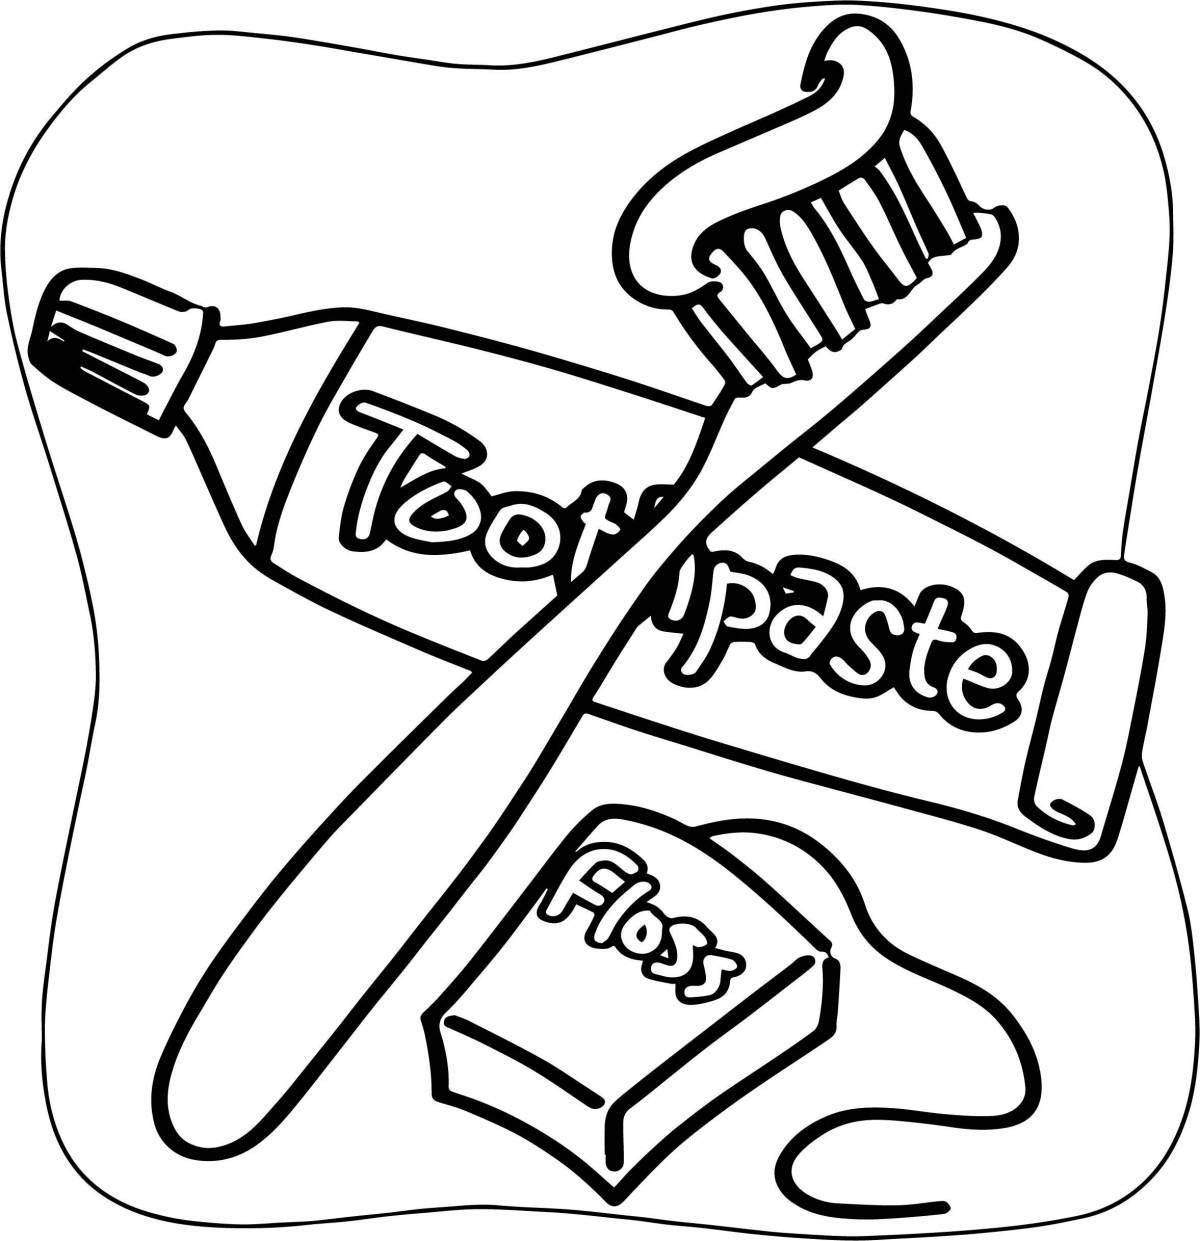 Playful toothbrush and toothpaste coloring page